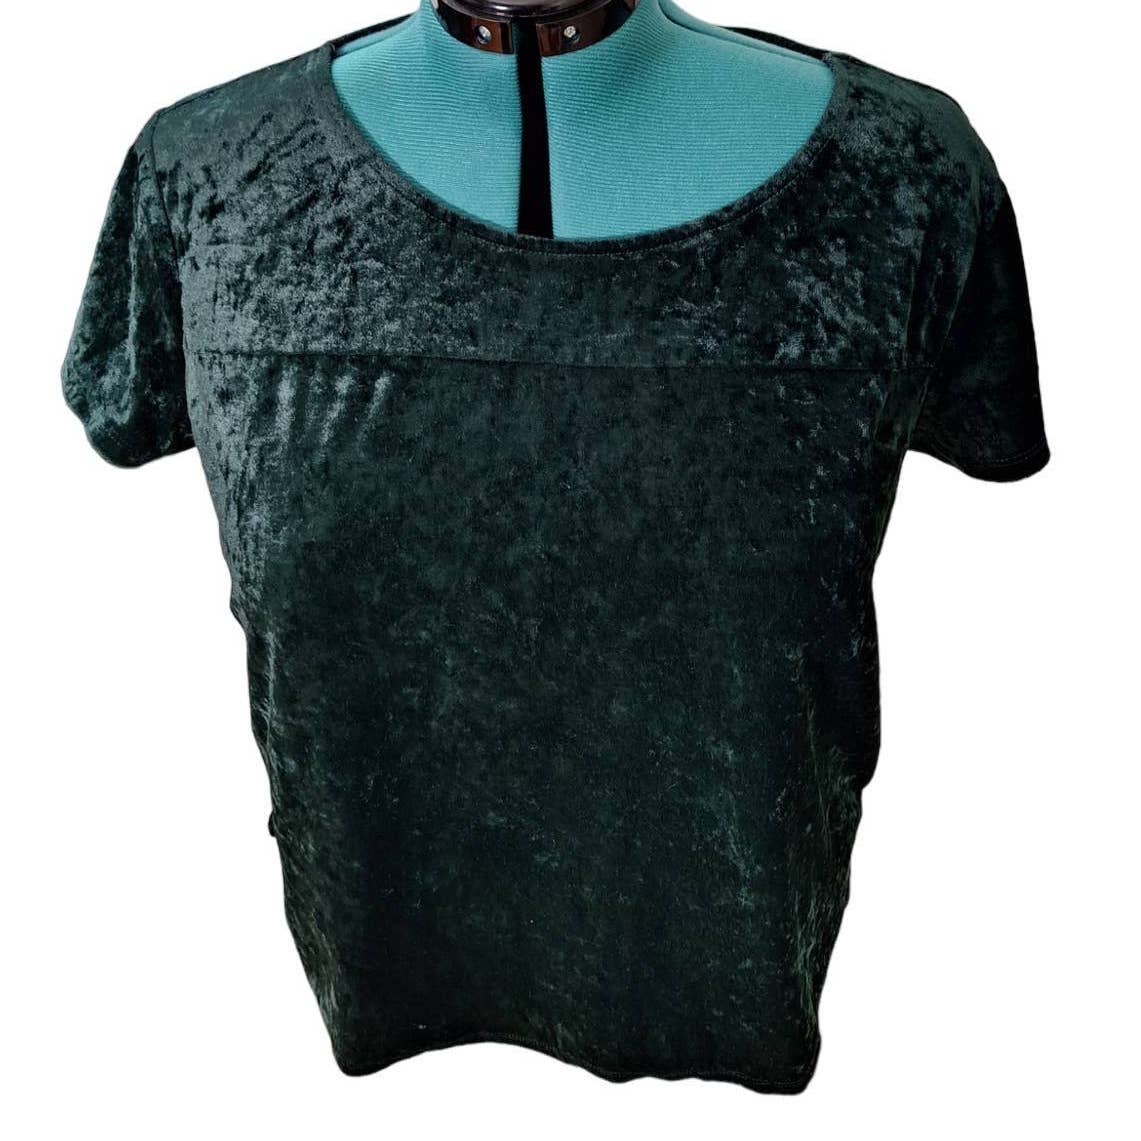 Y2K Green Crushed Velvet Stretch Top Size XL - themallvintage The Mall Vintage